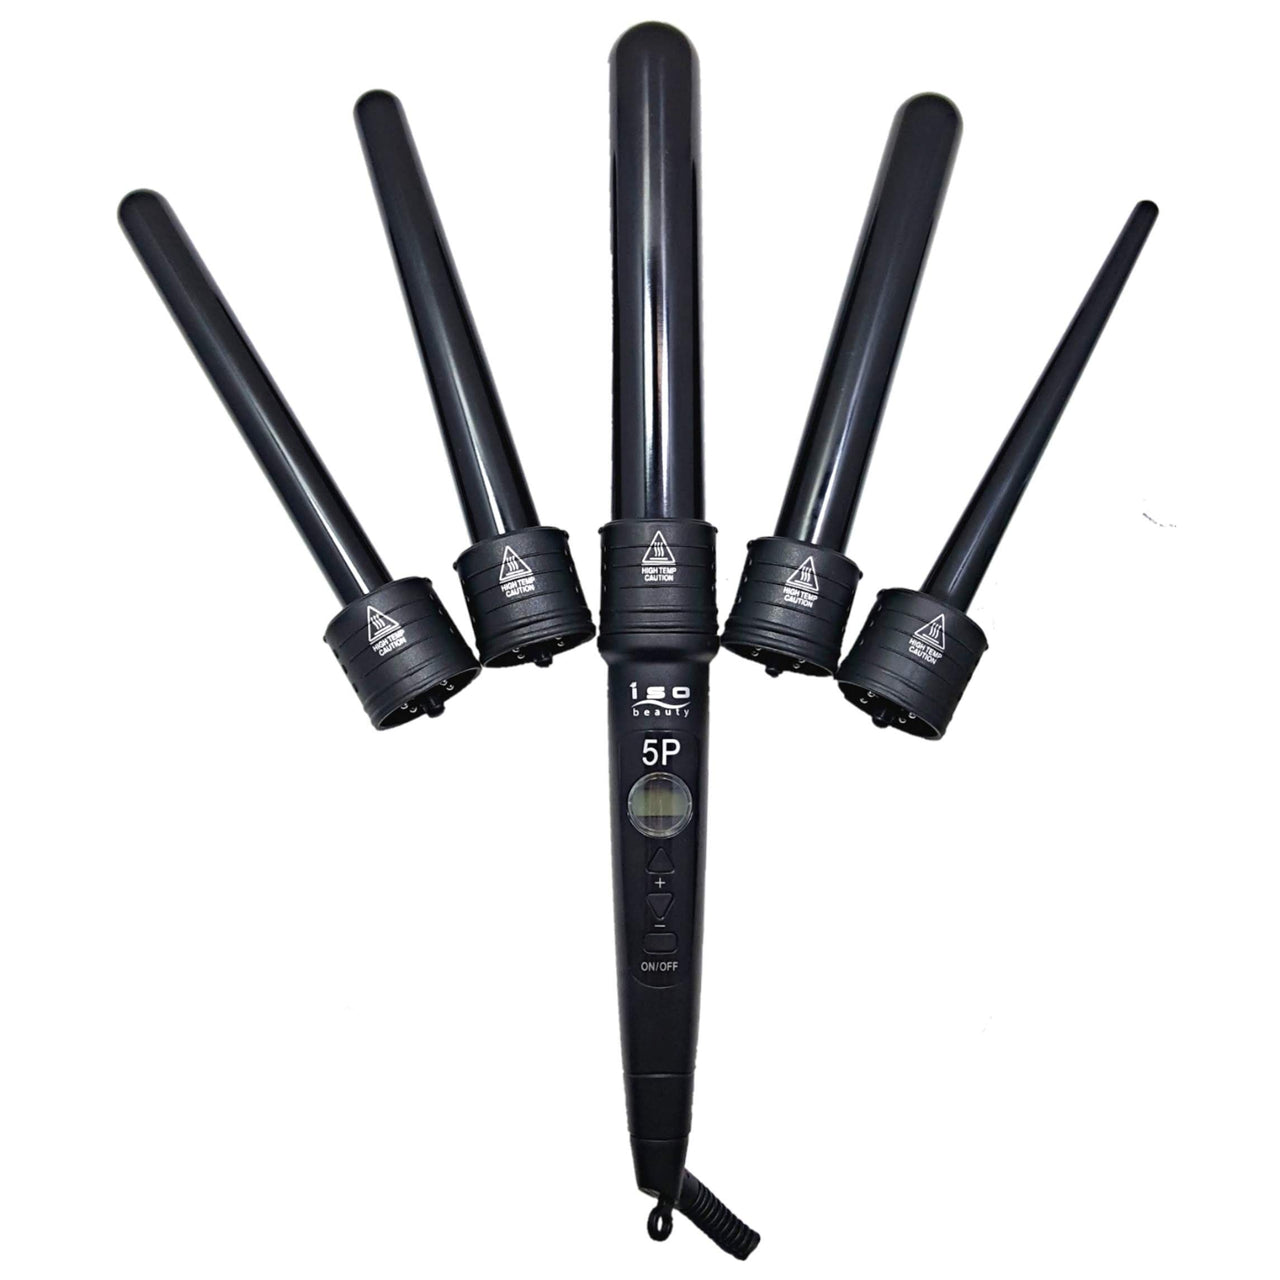 5-in-1 Digital Interchangeable Tourmaline Ceramic Curling Iron Clipless Hair Twister Set with Glove